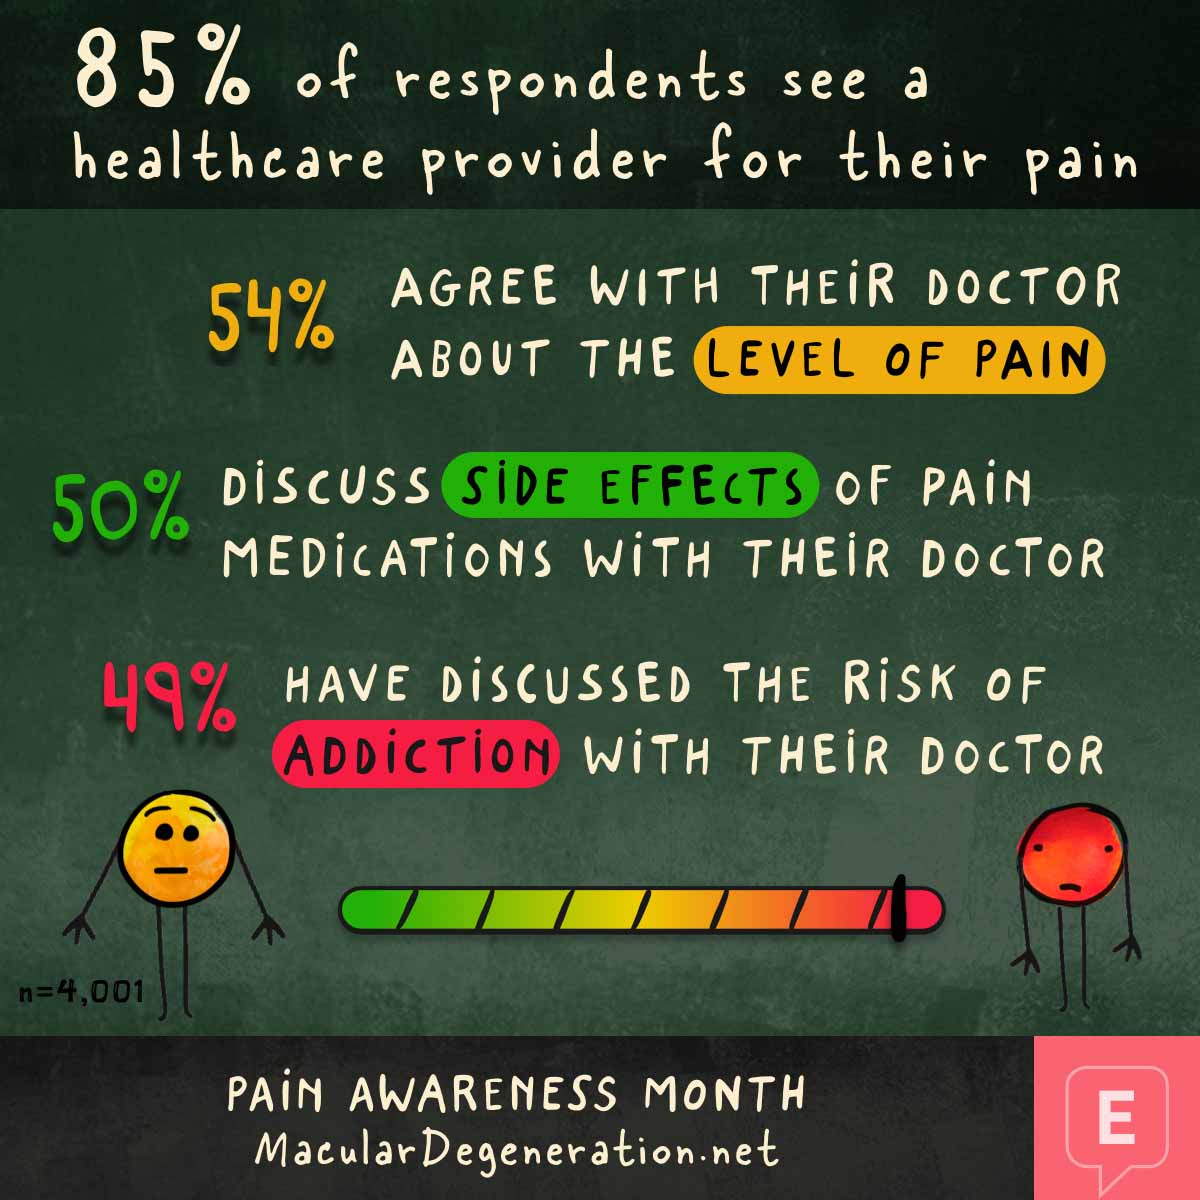 85% see a healthcare provider for pain and about half agree with them on level of pain, and discuss side effects and addiction